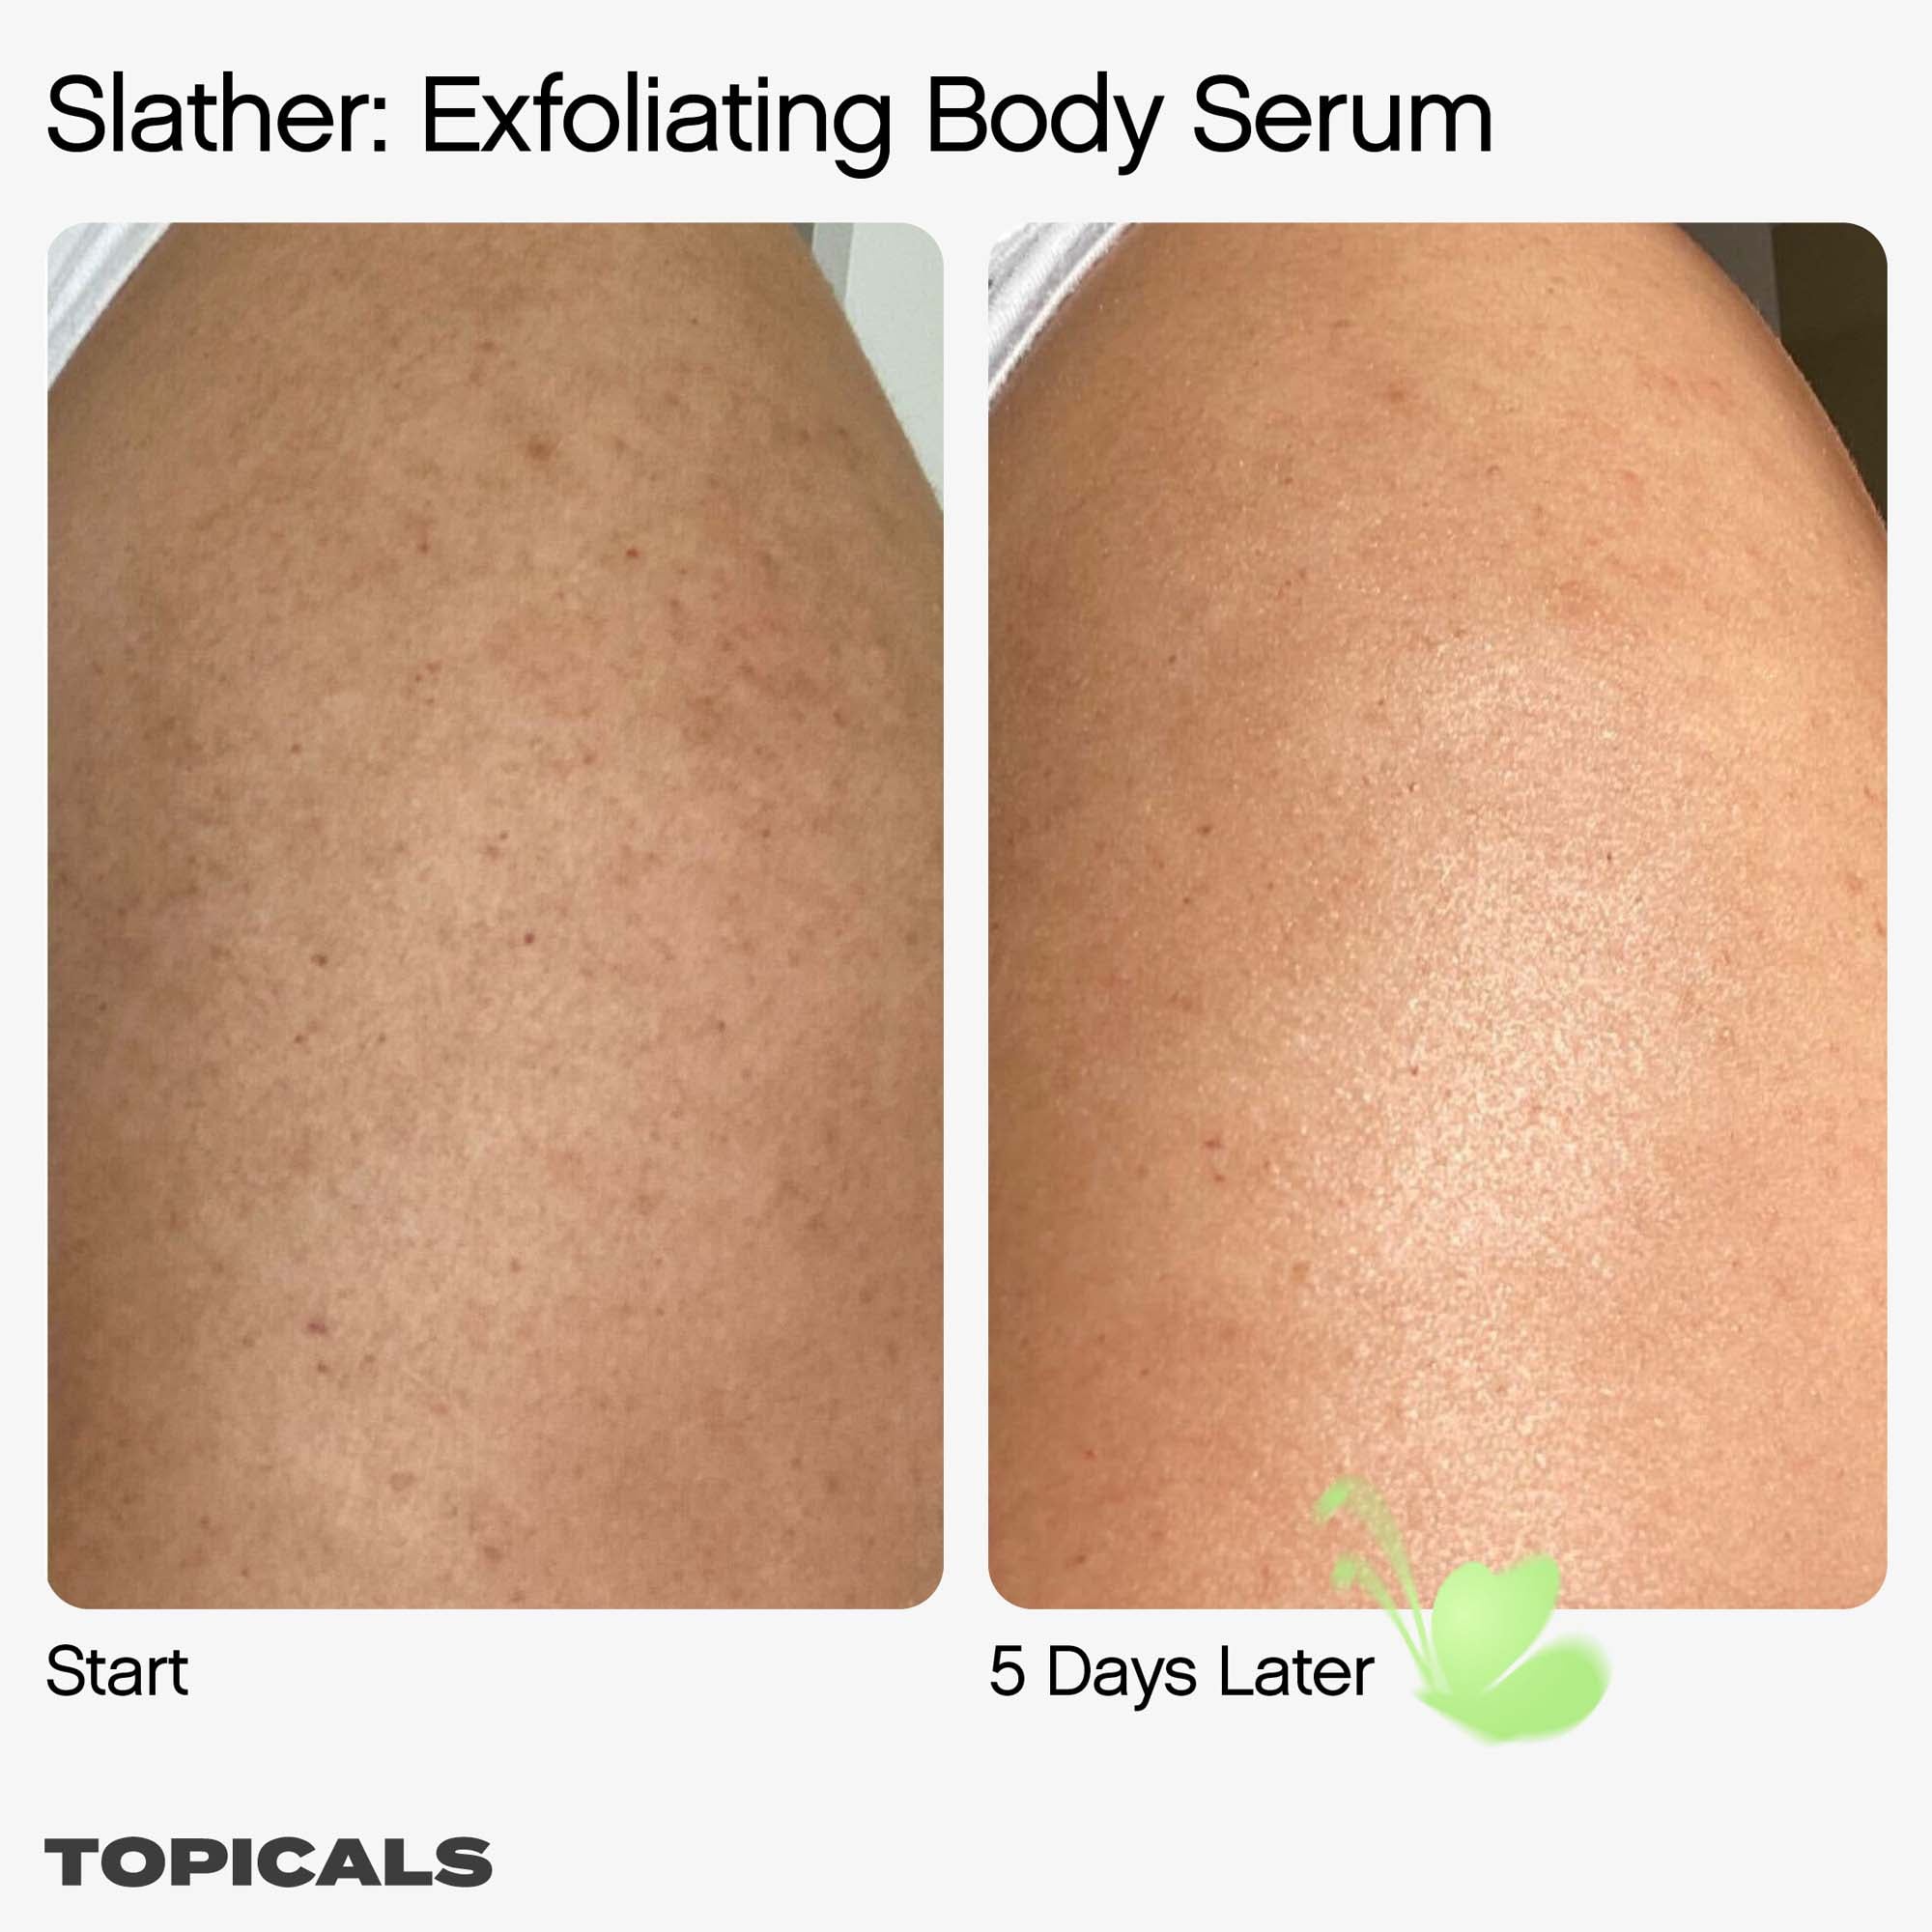 PREORDEN Topicals - Slather Exfoliating Body Serum with Retinol and AHAs